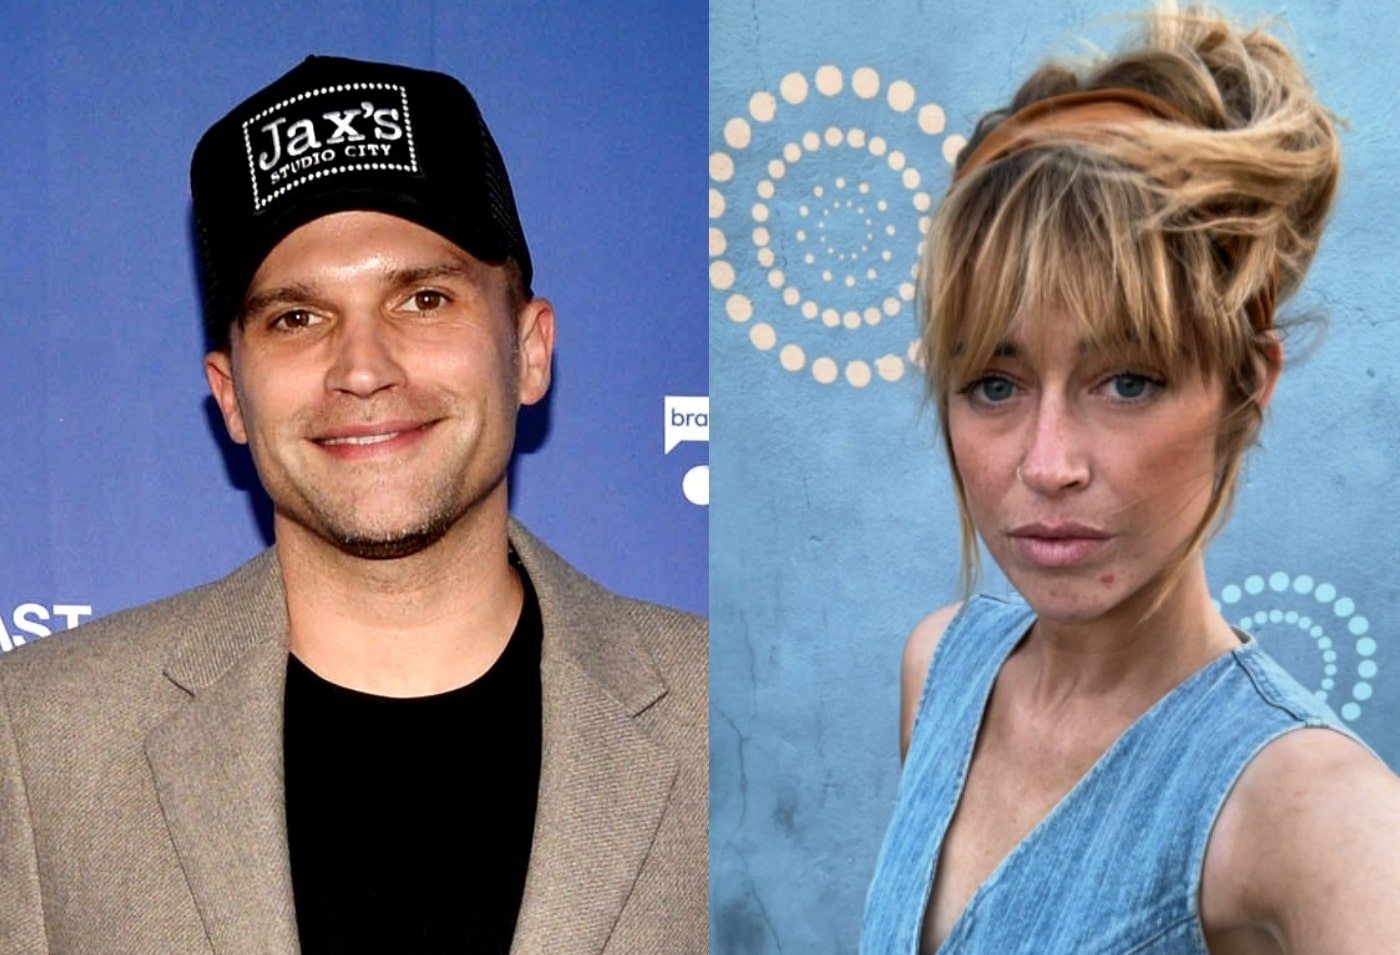 Tom Schwartz Accuses Jo Wenberg of Crossing the Line With Family as He Lists Her Red Flags and Slams Her as a "Compulsive Liar," Plus He Addresses Leaked Texts and Cutting Her Off Forever